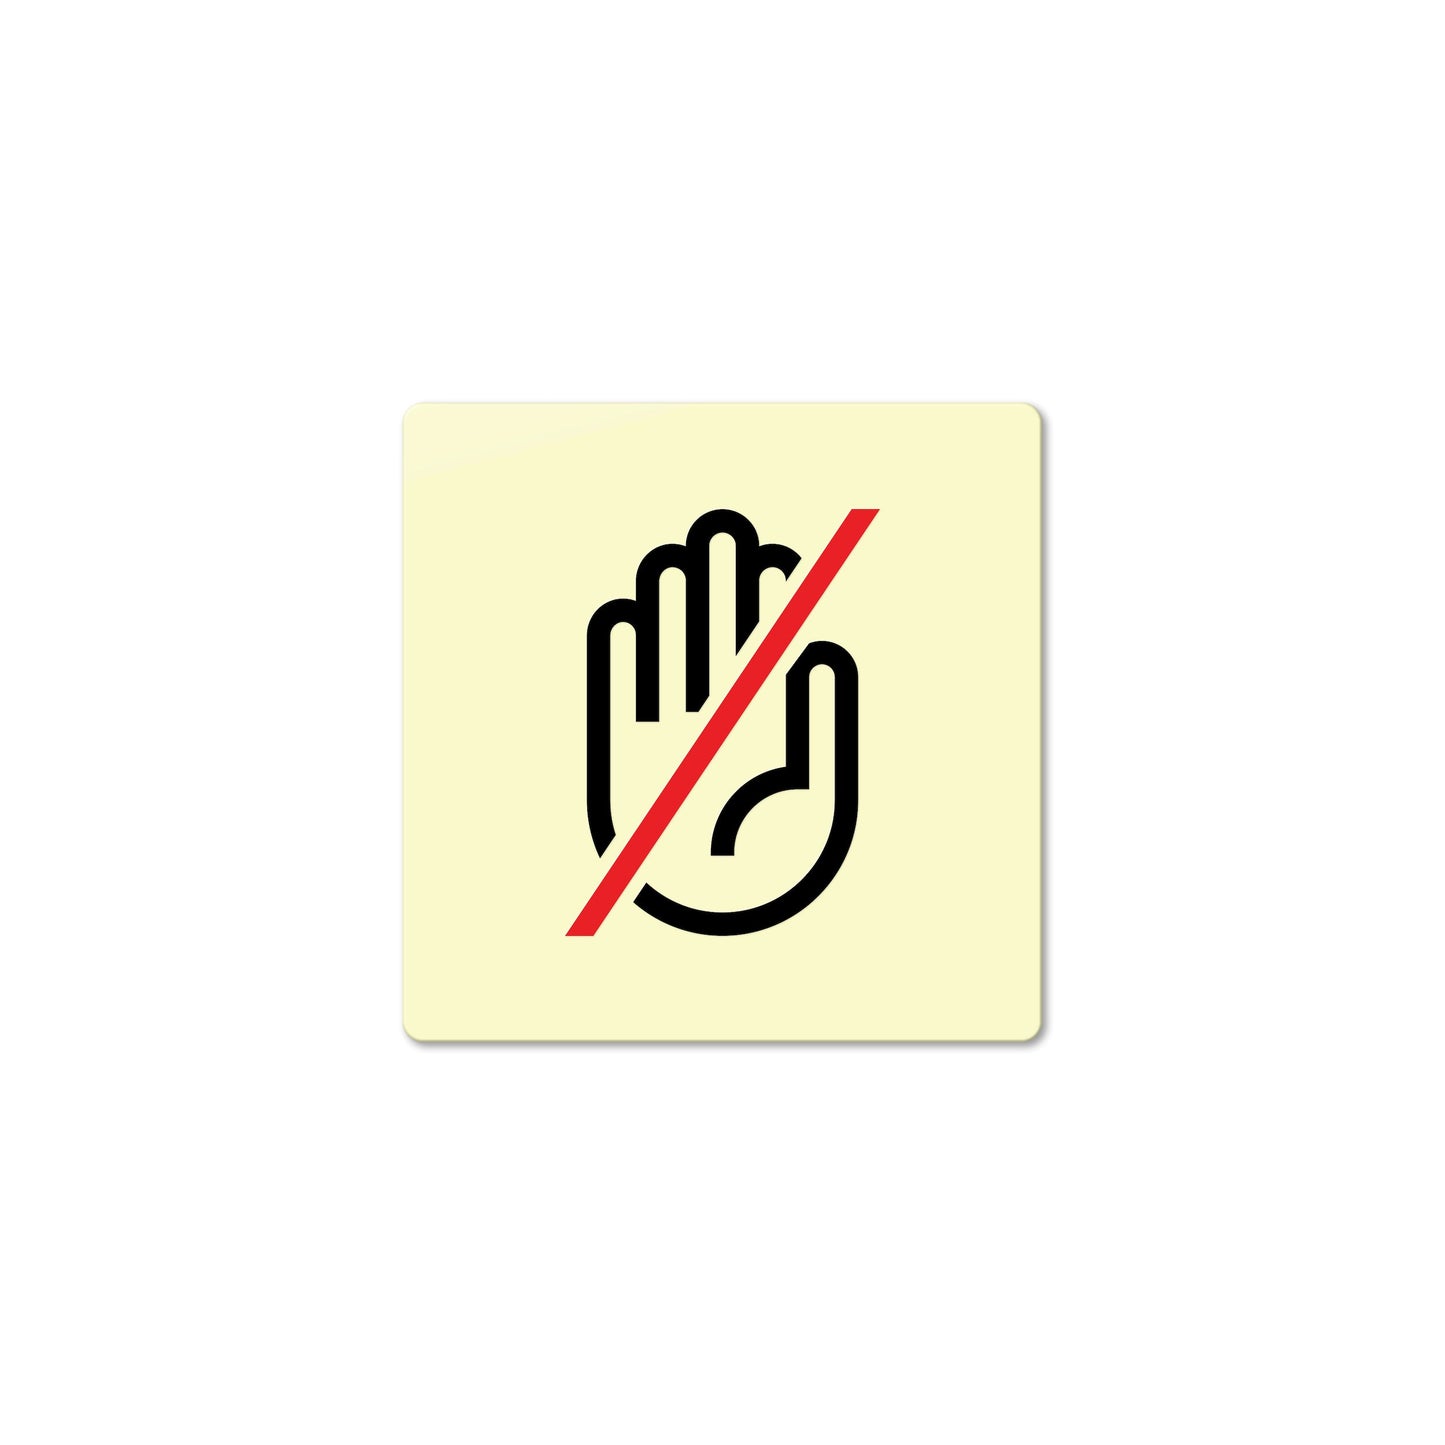 Do Not Touch (Pictogram)